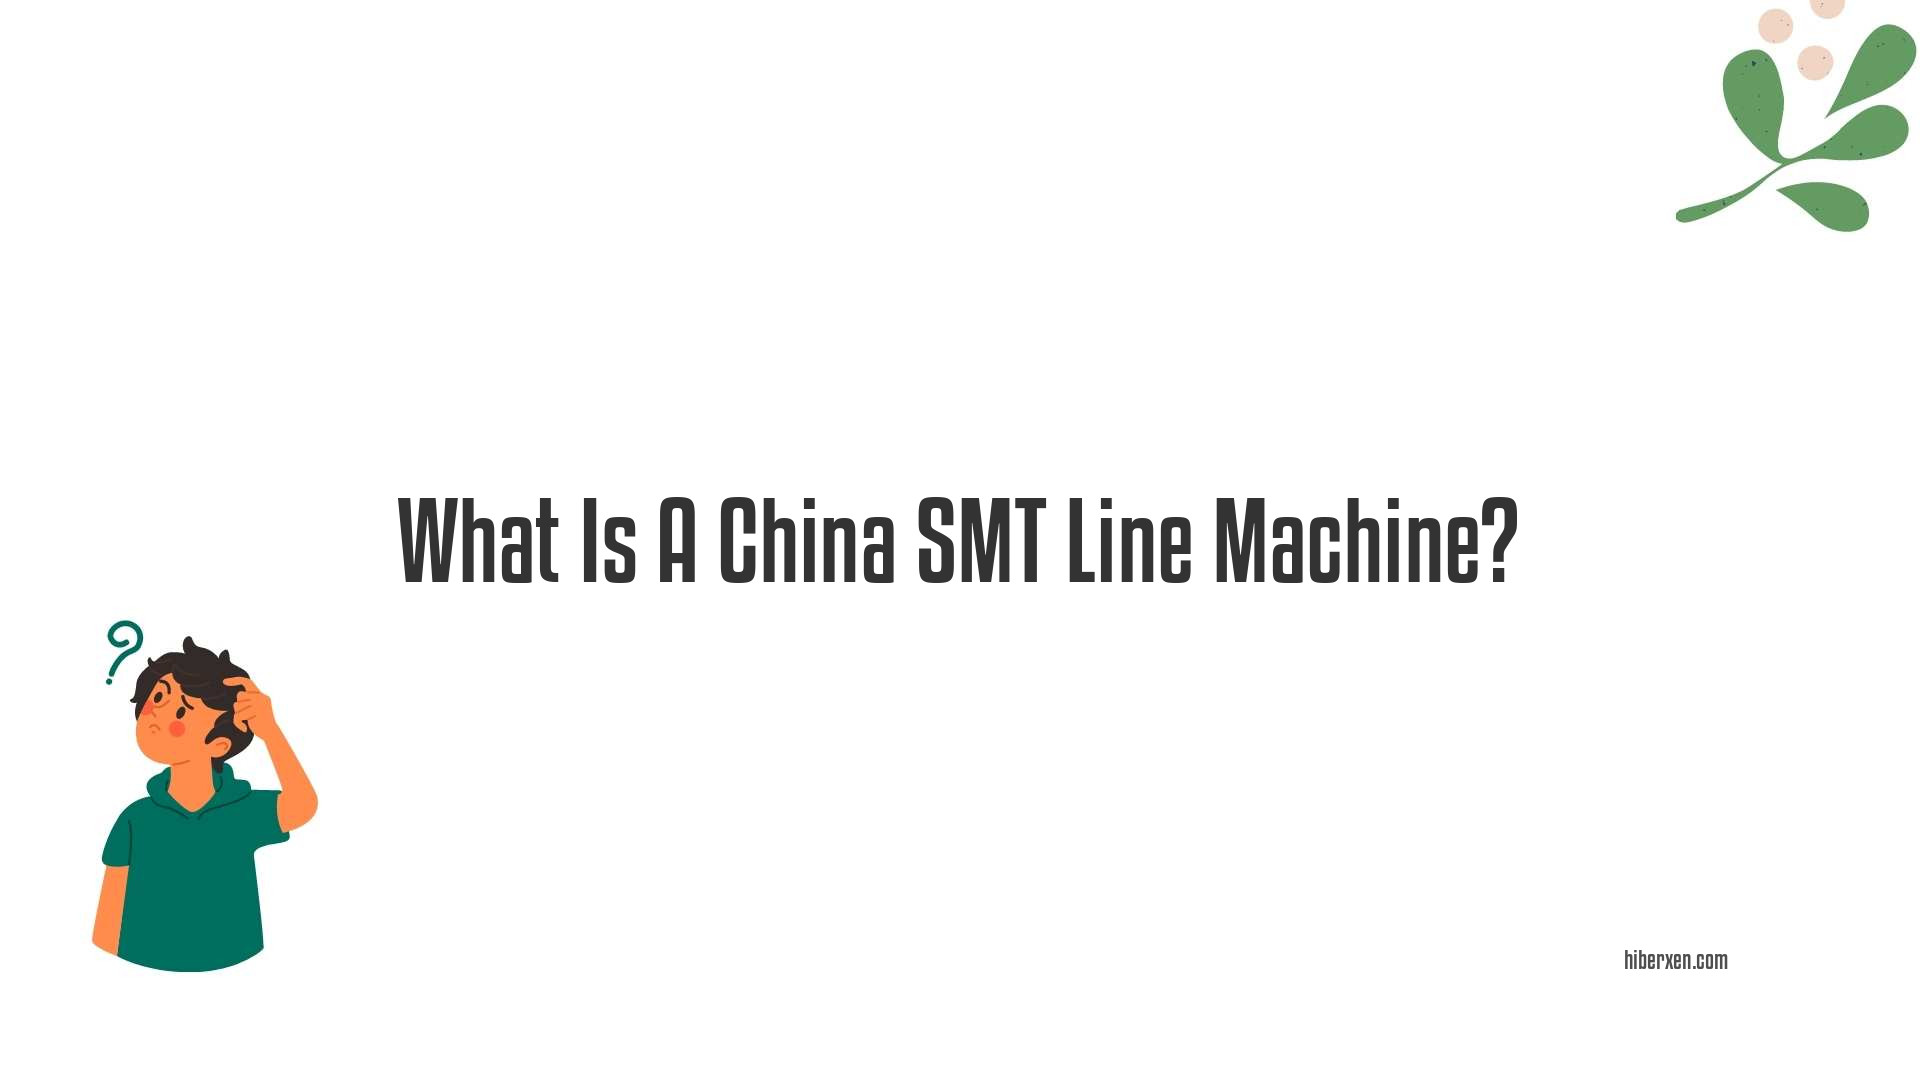 What Is A China SMT Line Machine?